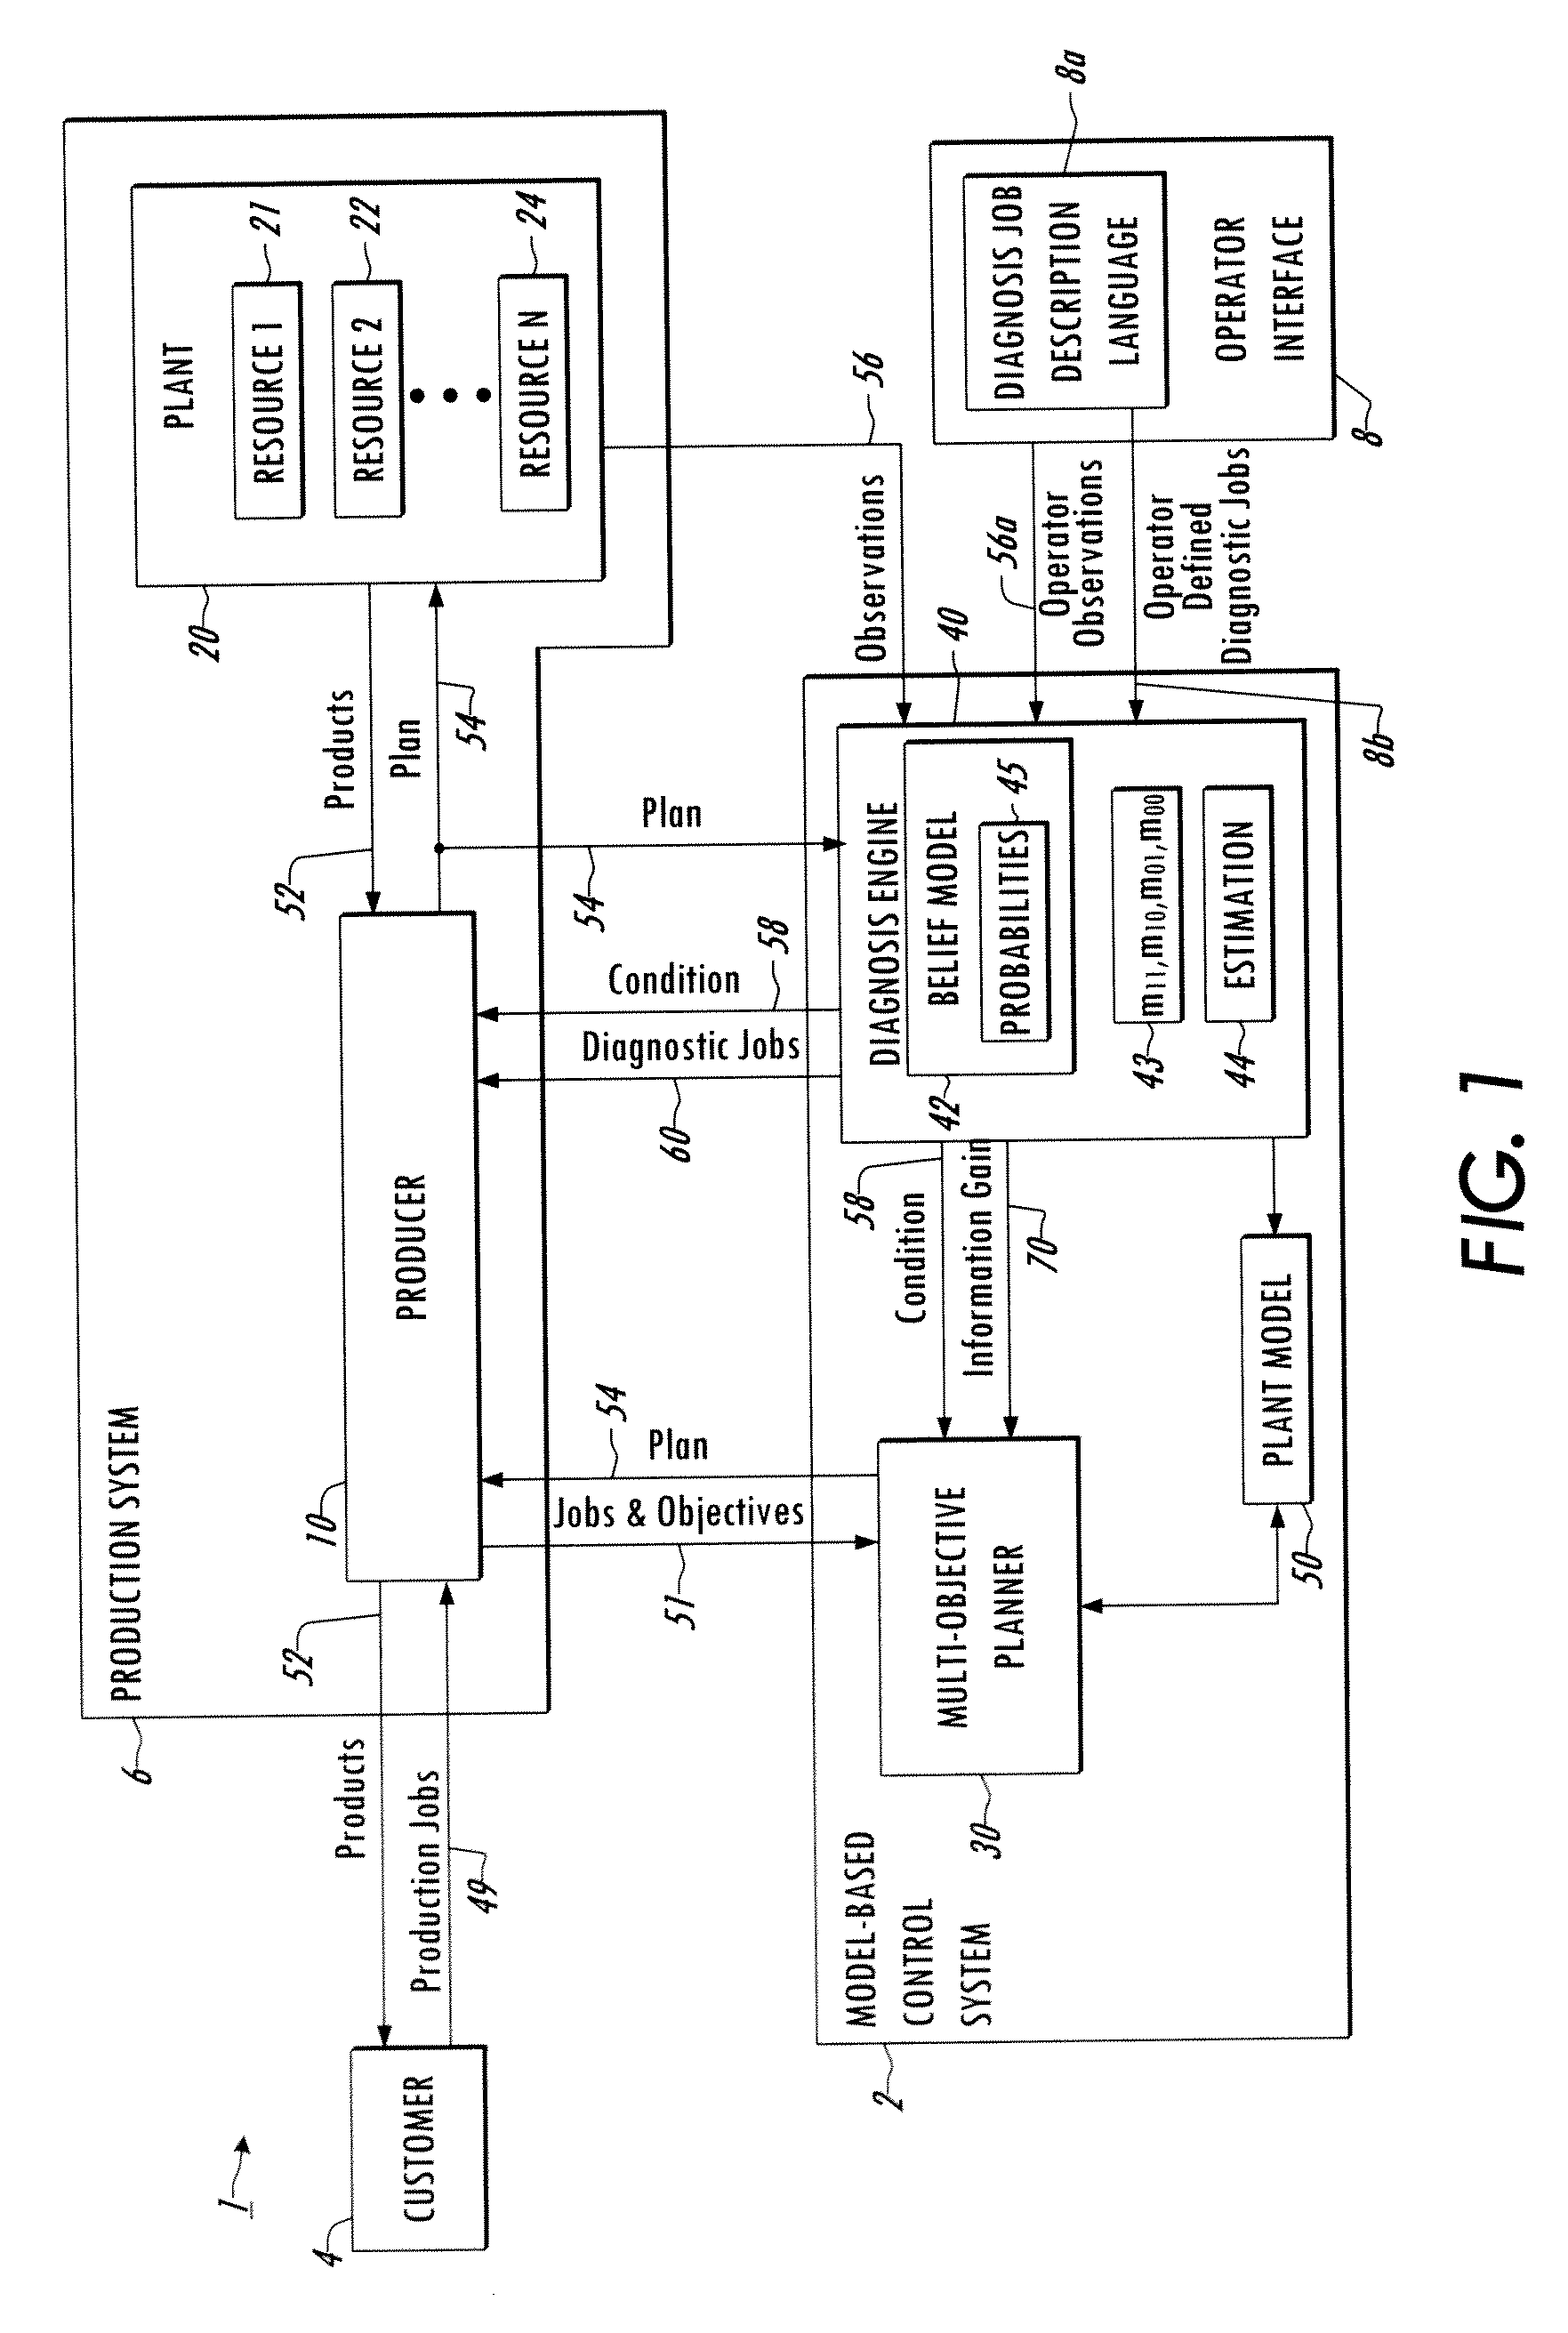 Methods and systems for continously estimating persistent and intermittent failure probabilities for production resources